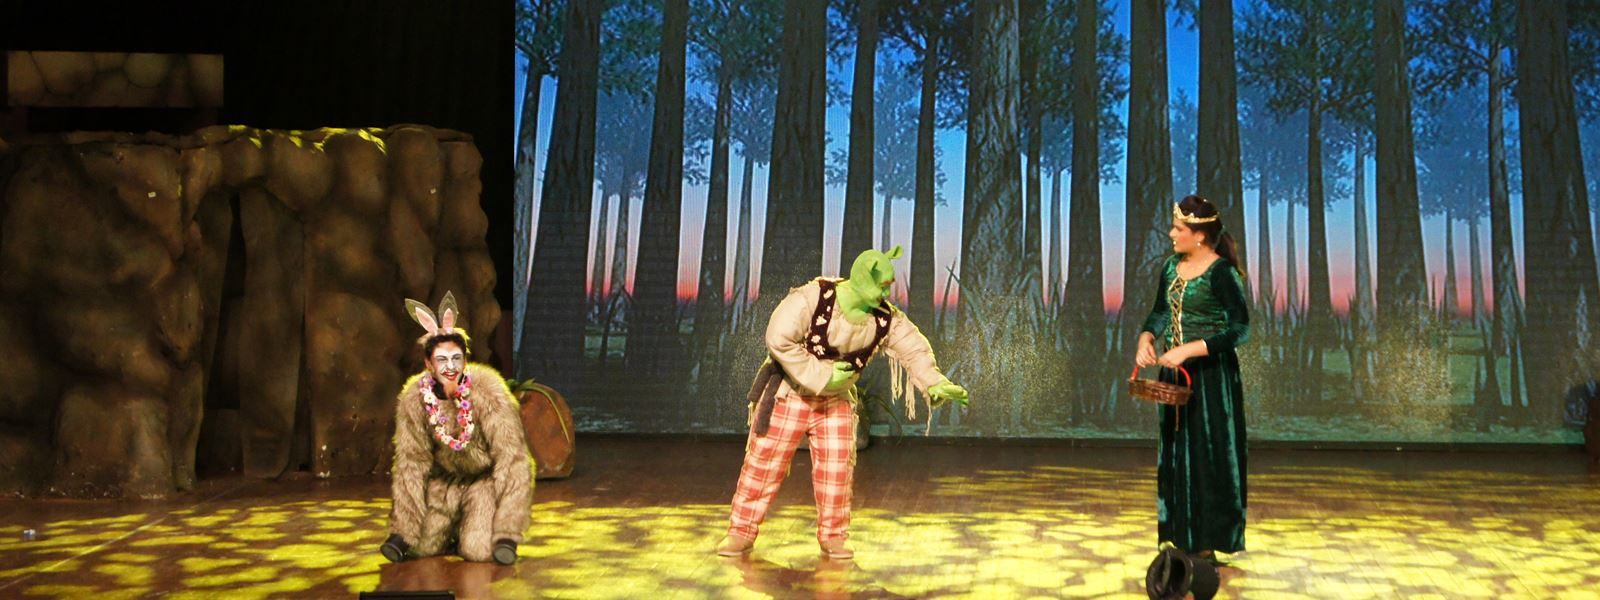 Shrek the Musical, theatre sound & Stage Lighting , Acoustic Control